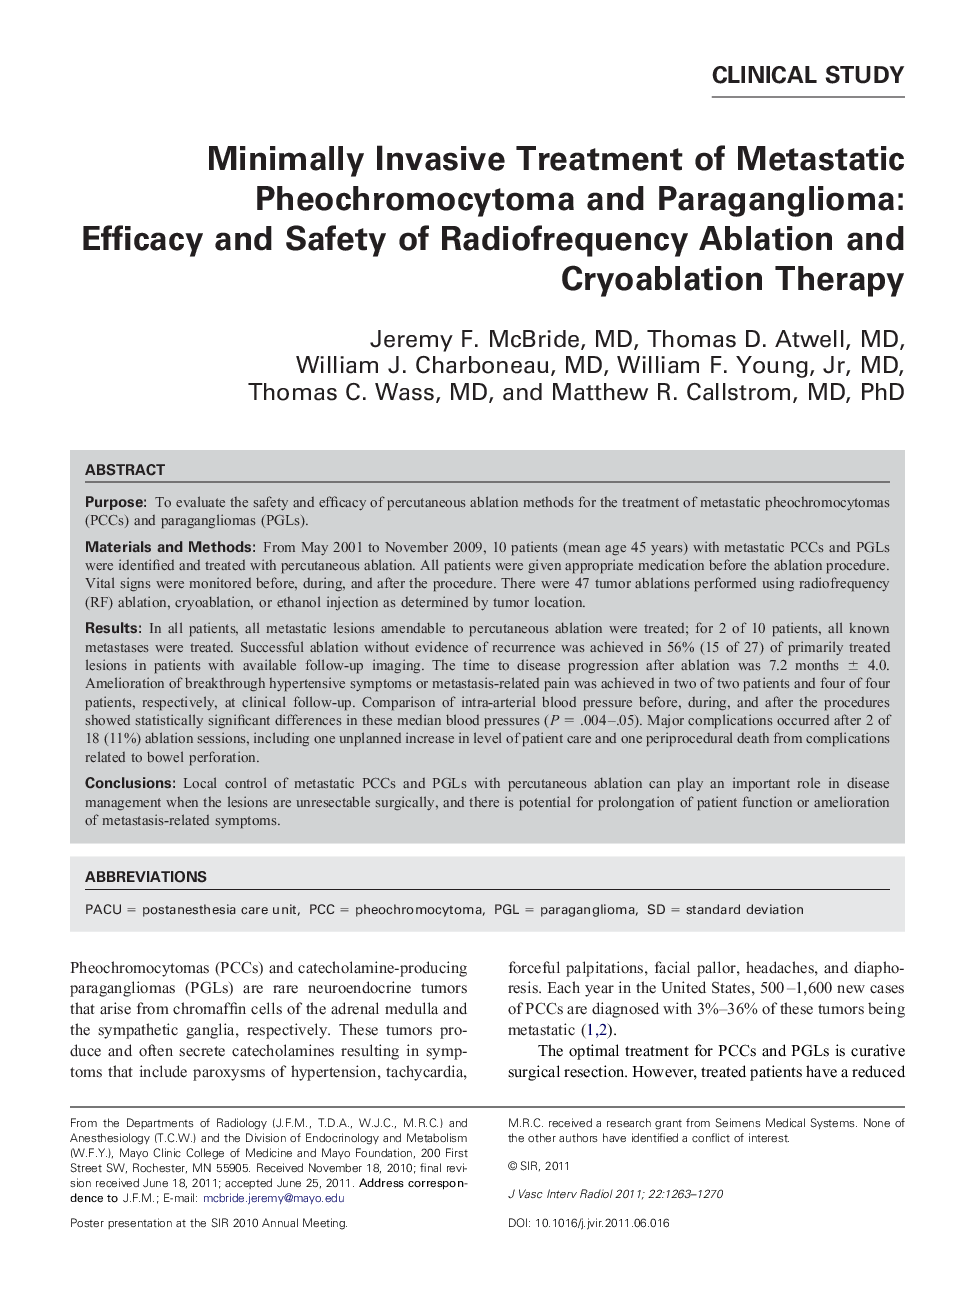 Minimally Invasive Treatment of Metastatic Pheochromocytoma and Paraganglioma: Efficacy and Safety of Radiofrequency Ablation and Cryoablation Therapy